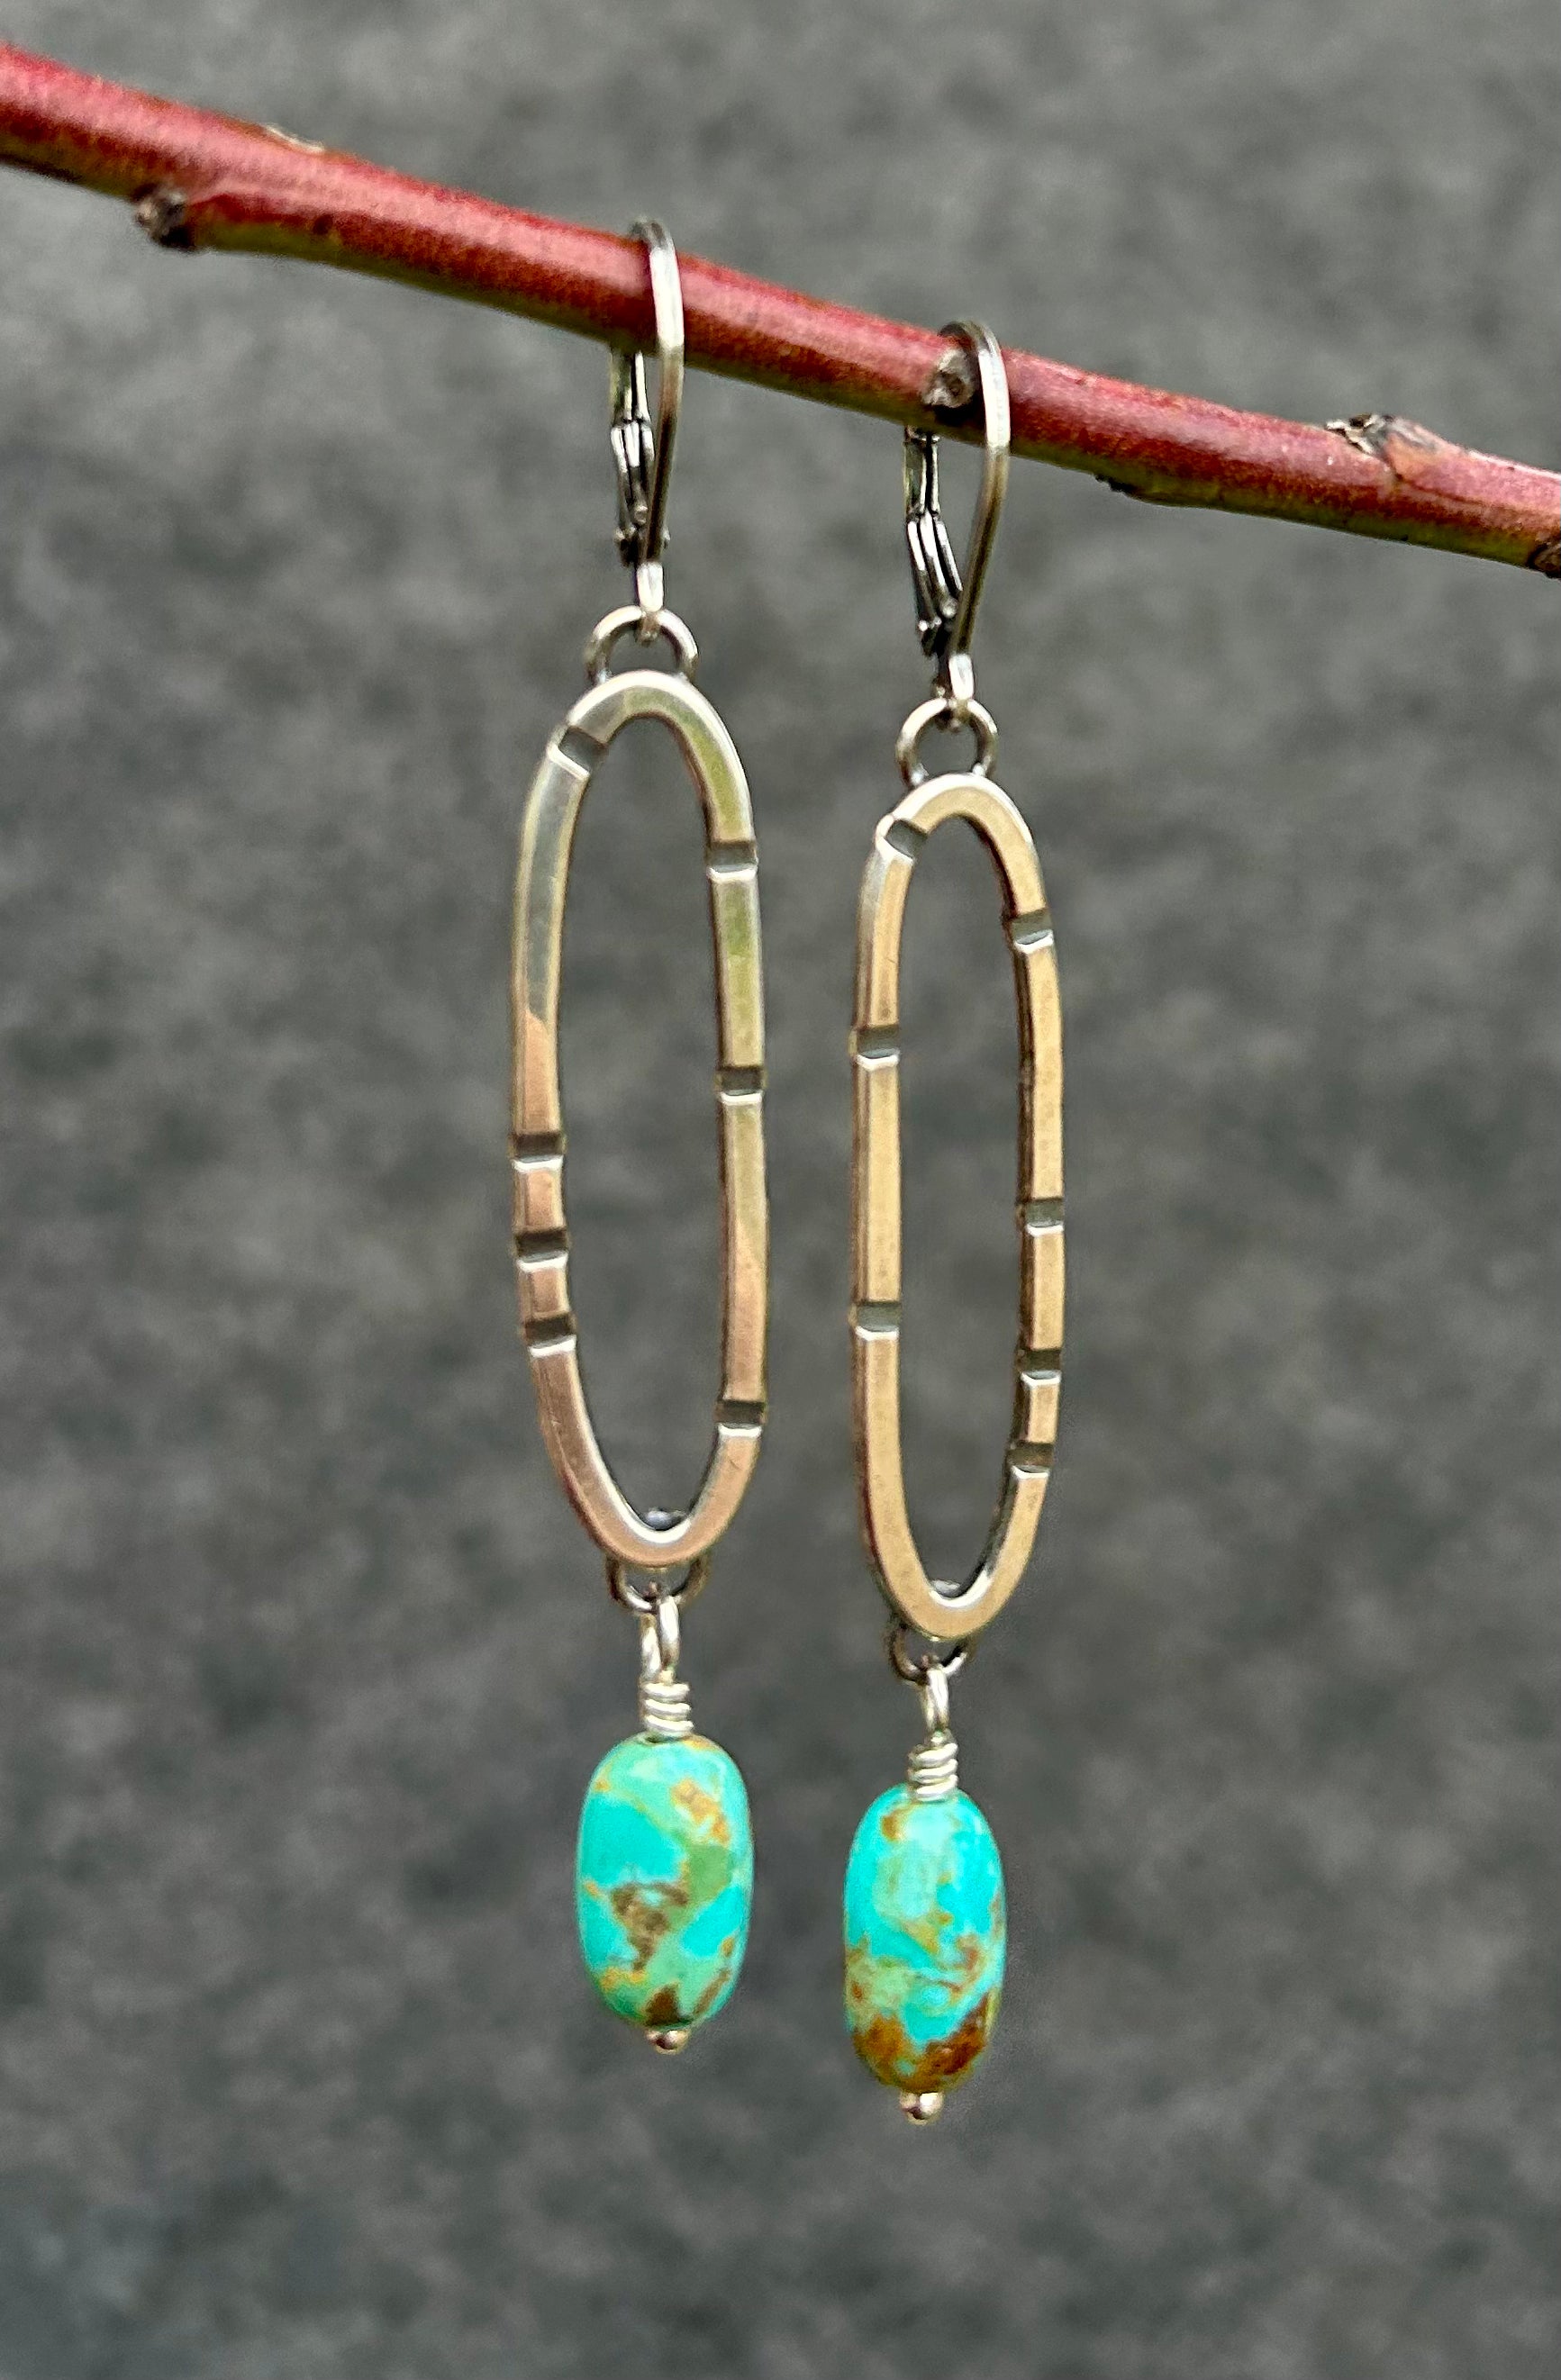 Anvil Hoop Earrings with Stamped Sterling Silver and Blue/Green Turquoise